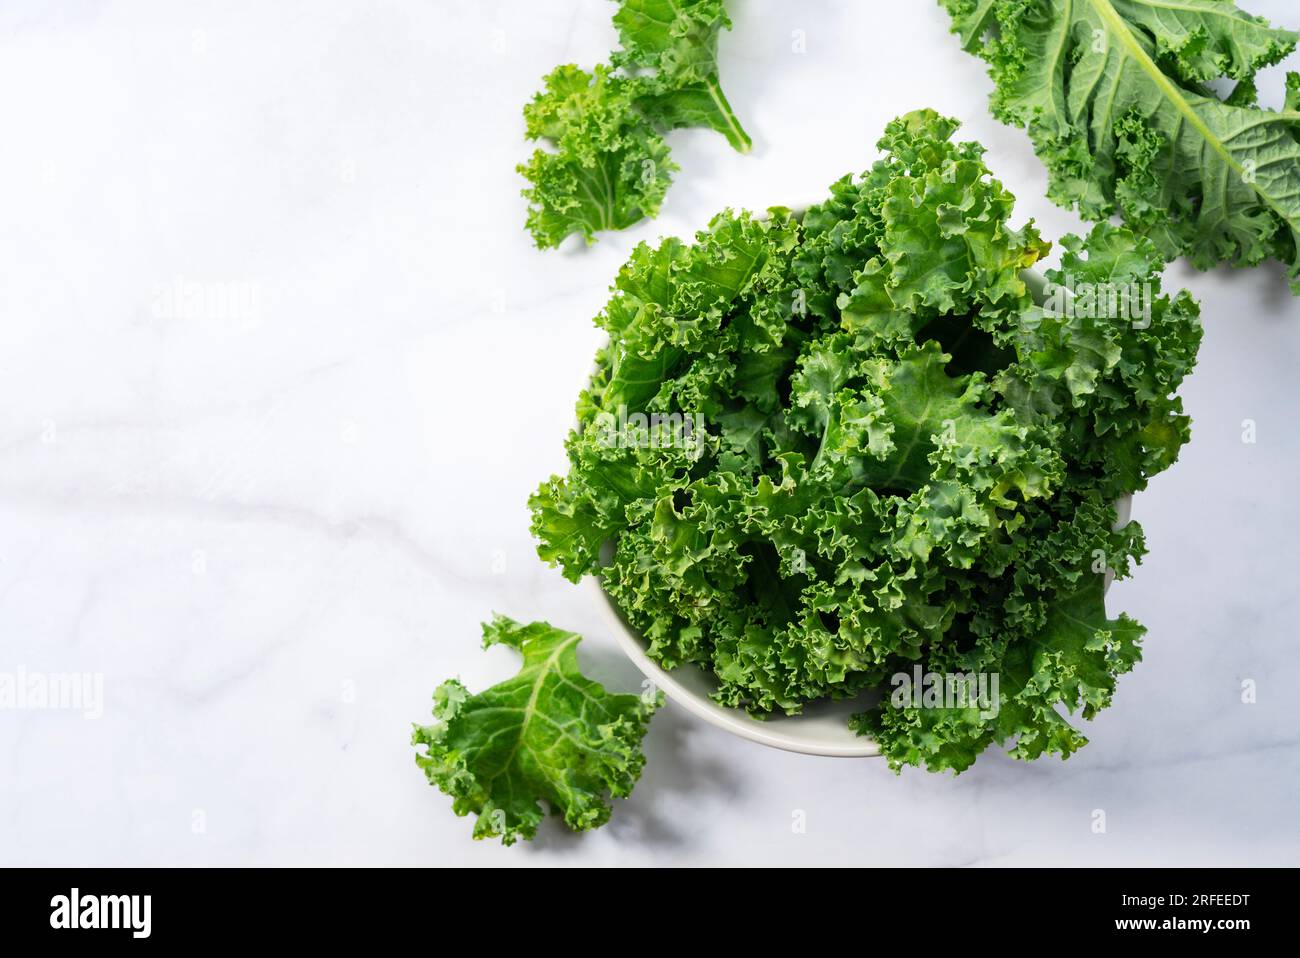 Kale in bowl on marble background. curly kale. View from directly above. Stock Photo